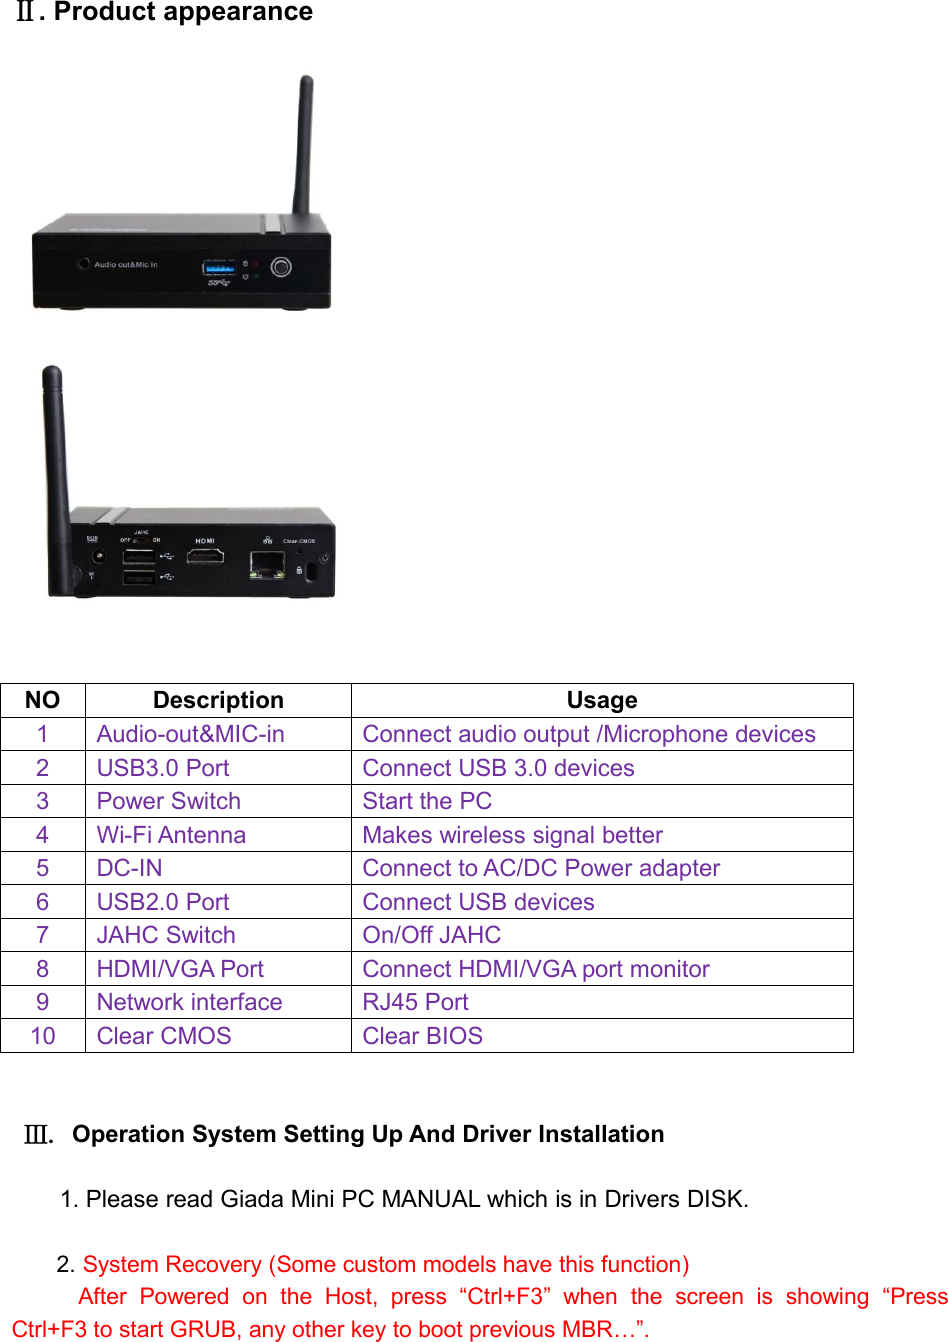 Ⅱ. Product appearanceNODescriptionUsage1Audio-out&amp;MIC-inConnect audio output /Microphone devices2USB3.0 PortConnect USB 3.0 devices3Power SwitchStart the PC4Wi-Fi AntennaMakes wireless signal better5DC-INConnect to AC/DC Power adapter6USB2.0 PortConnect USB devices7JAHC SwitchOn/Off JAHC8HDMI/VGA PortConnect HDMI/VGA port monitor9Network interfaceRJ45 Port10Clear CMOSClear BIOSⅢ. Operation System Setting Up And Driver Installation1. Please read Giada Mini PC MANUAL which is in Drivers DISK.2. System Recovery (Some custom models have this function)After Powered on the Host, press “Ctrl+F3” when the screen is showing “PressCtrl+F3 to start GRUB, any other key to boot previous MBR…”.